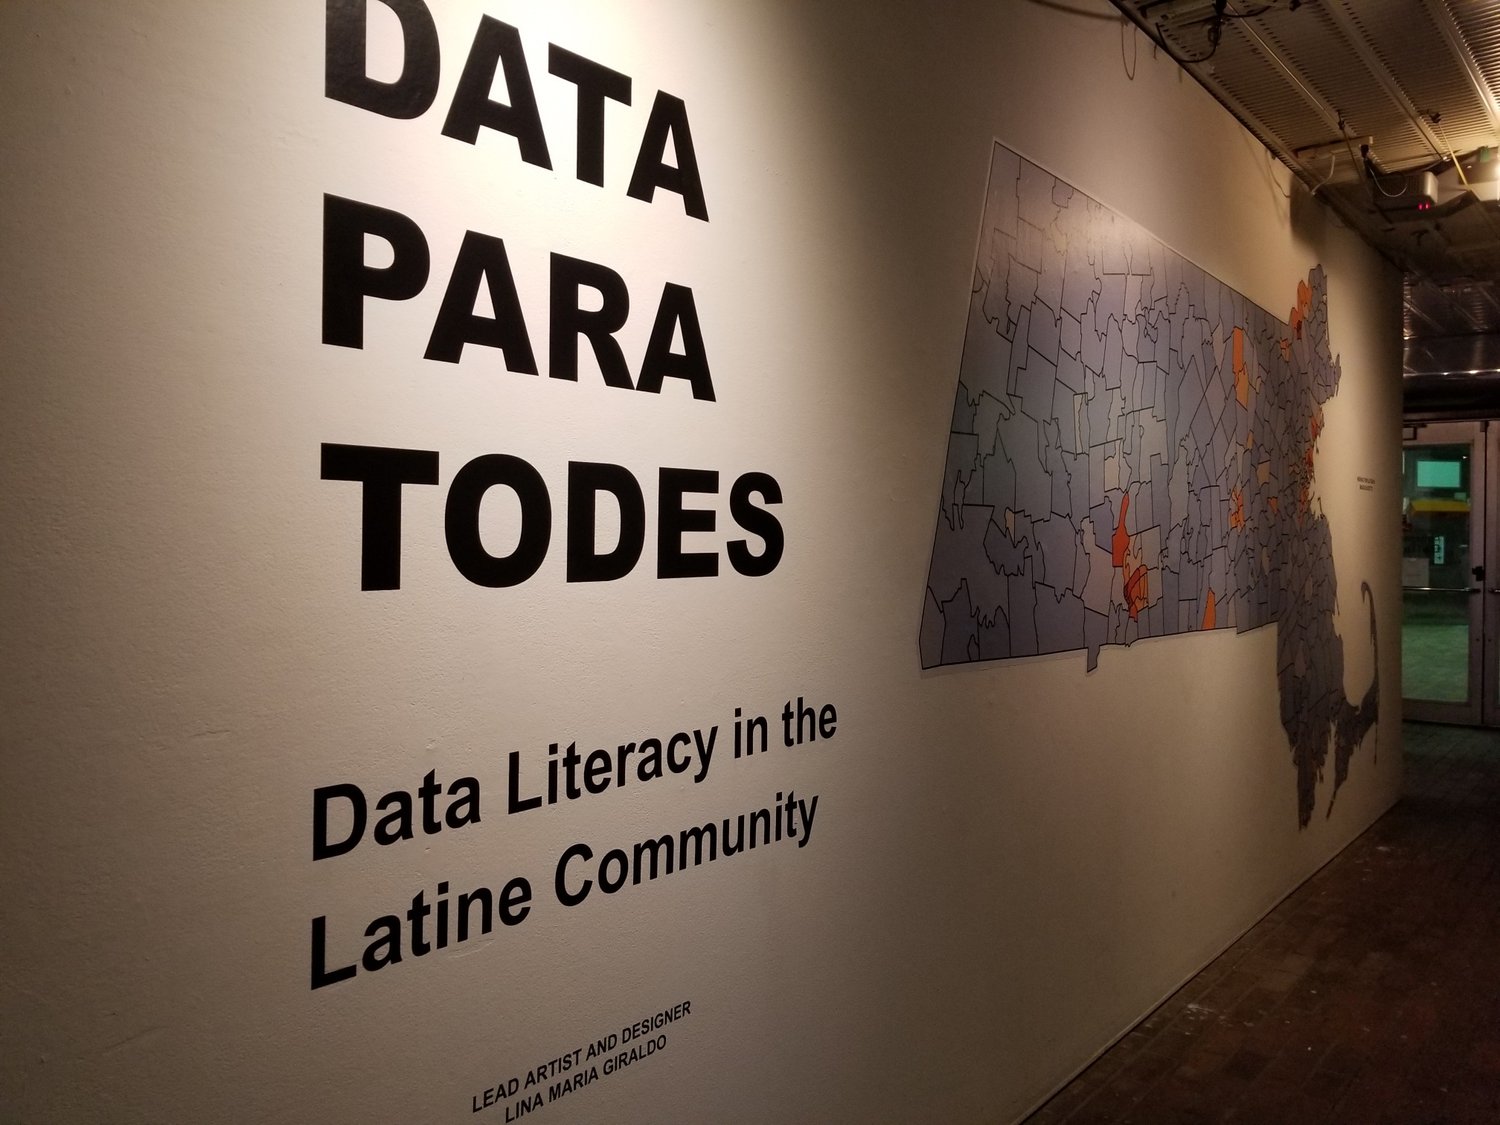 Text on wall that says "Data Para Todes: Data Literacy in the Latine Community. Lead artist and designer Lina Maria Giraldo" and a picture of a map with borders.